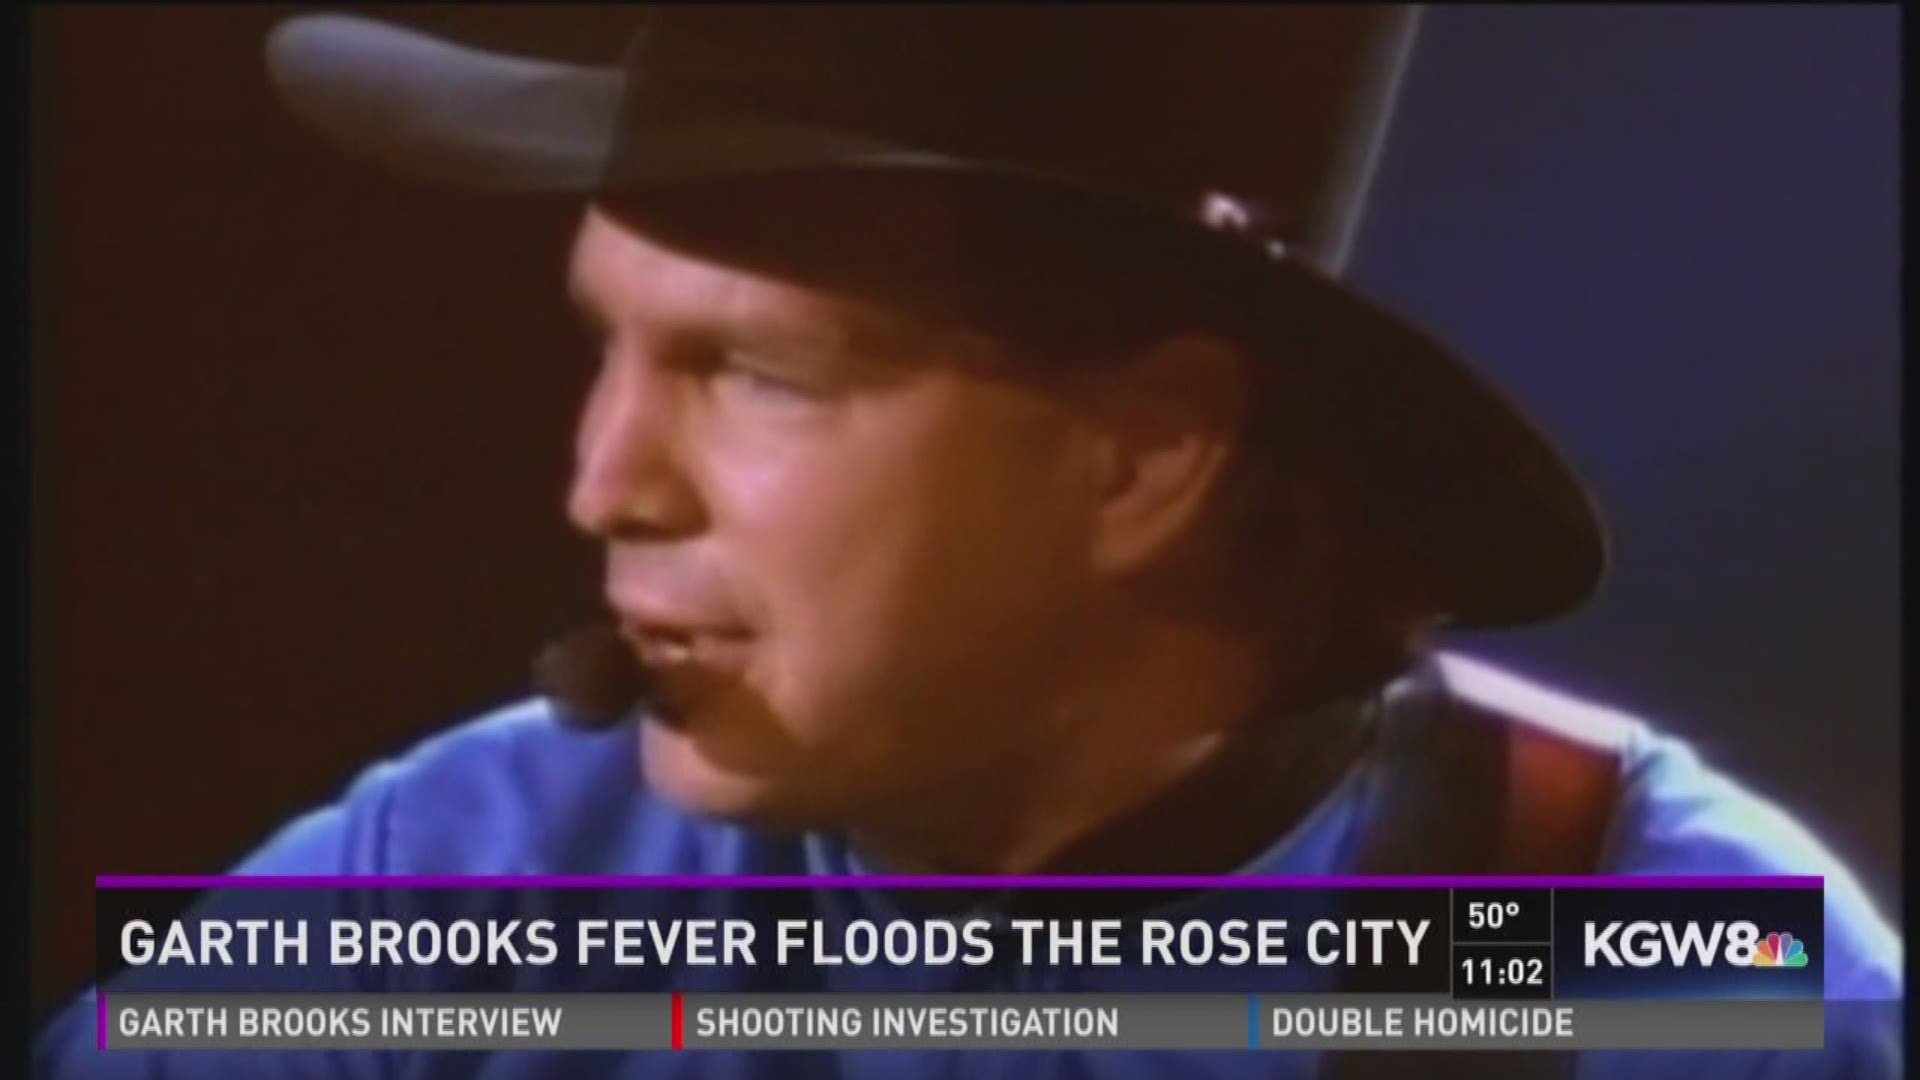 Fans gush over Garth Brooks' Sunday shows at the Moda Center